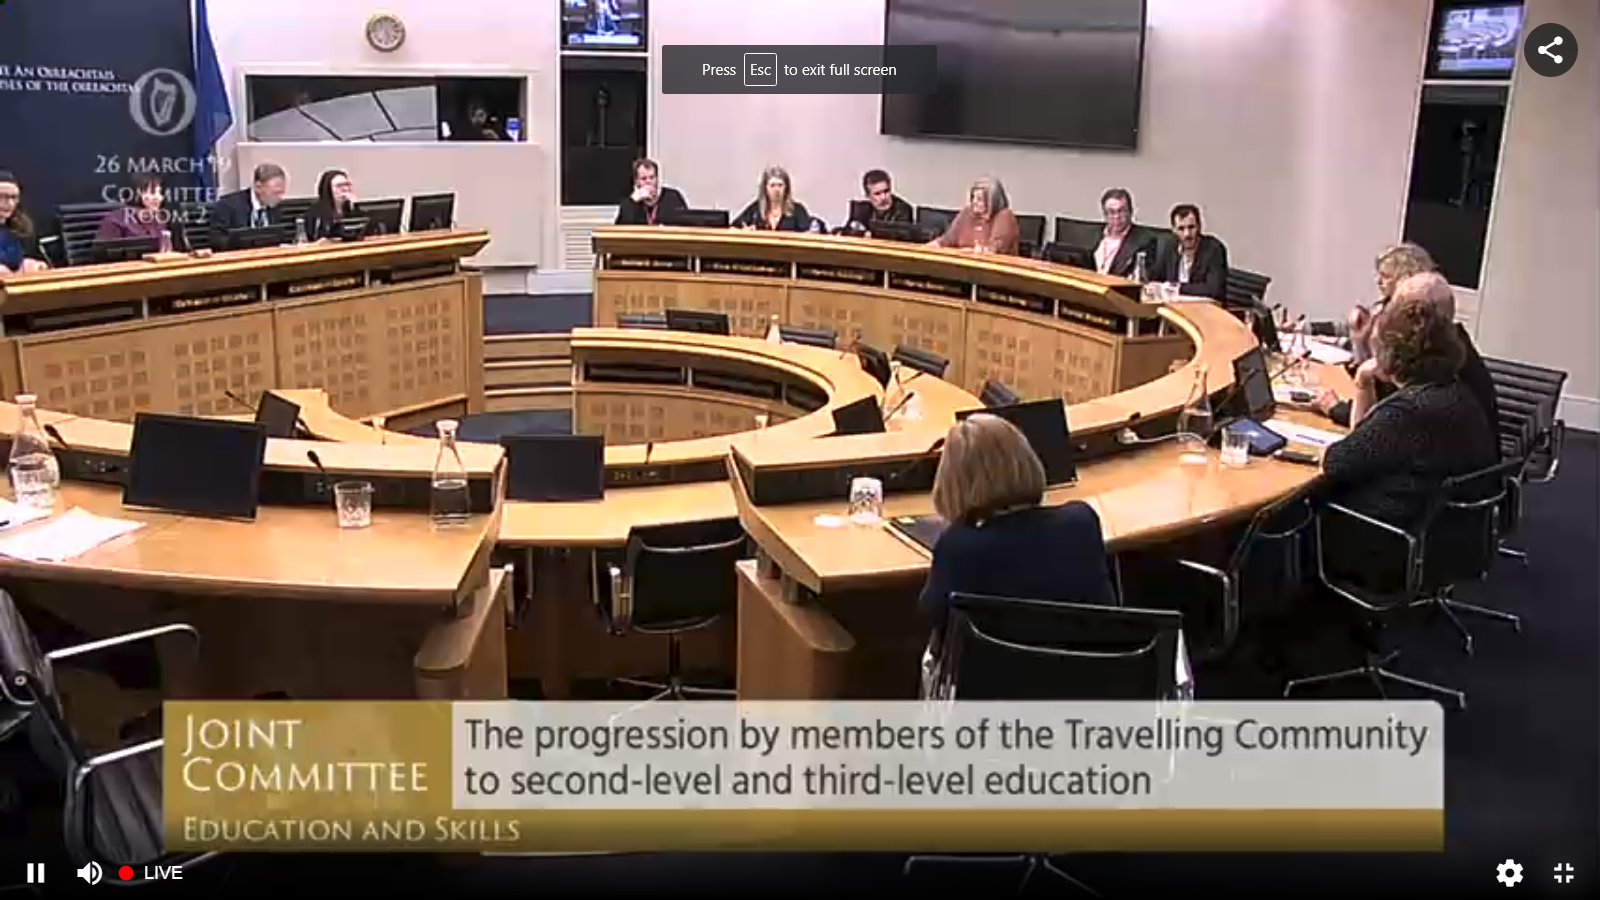 Reduced Timetables disruptive to quality education Oireachtas Committee hears